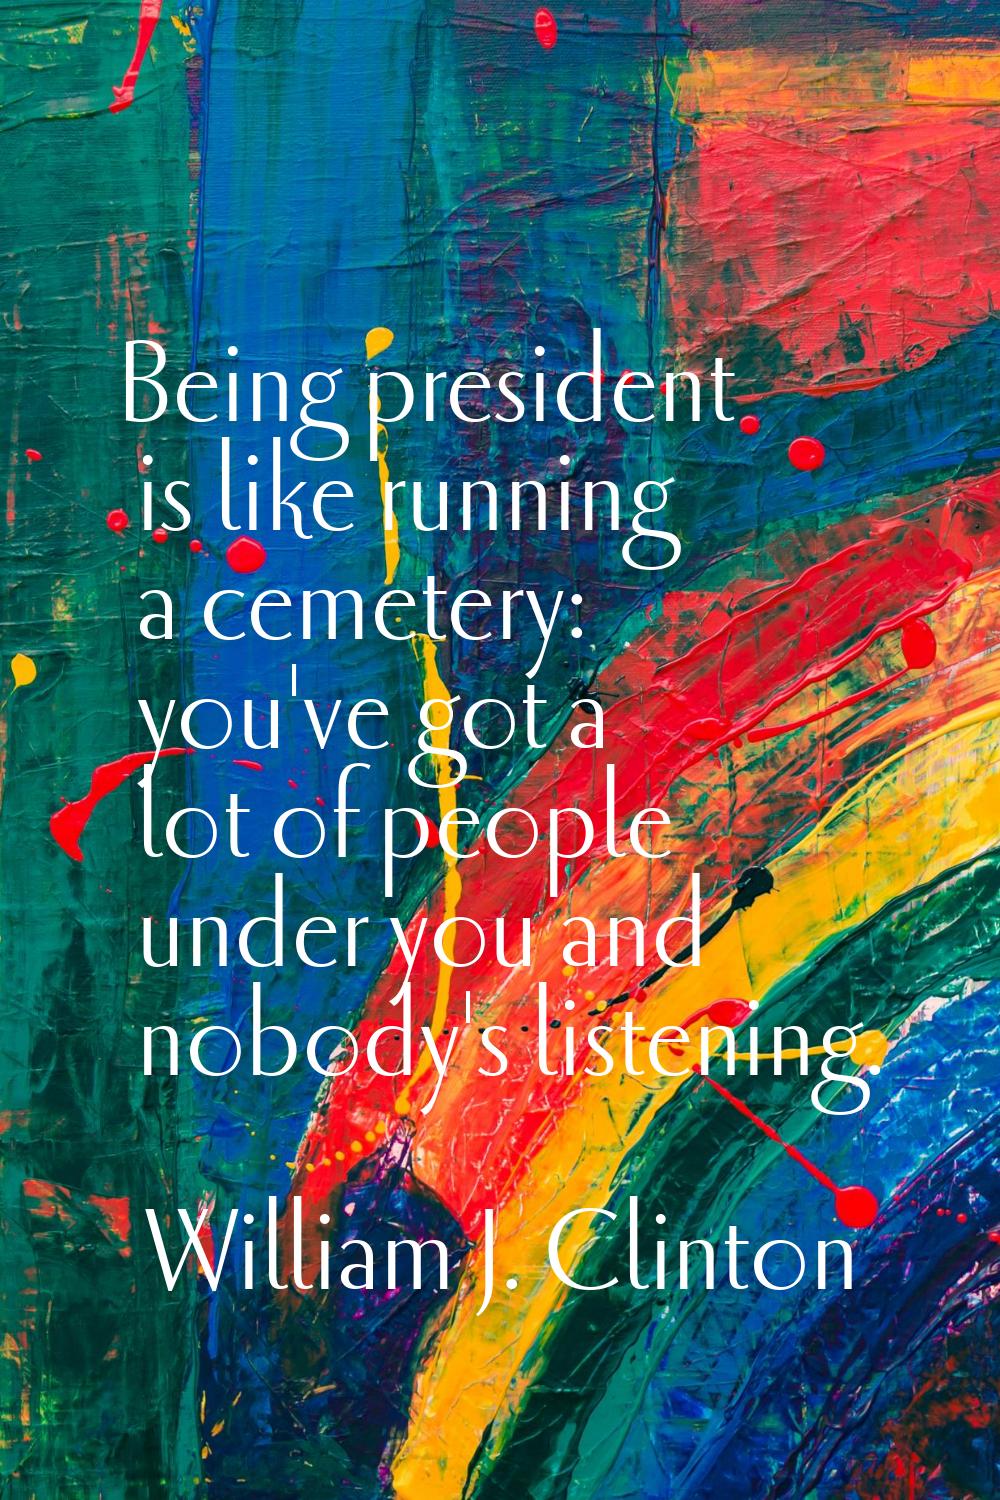 Being president is like running a cemetery: you've got a lot of people under you and nobody's liste